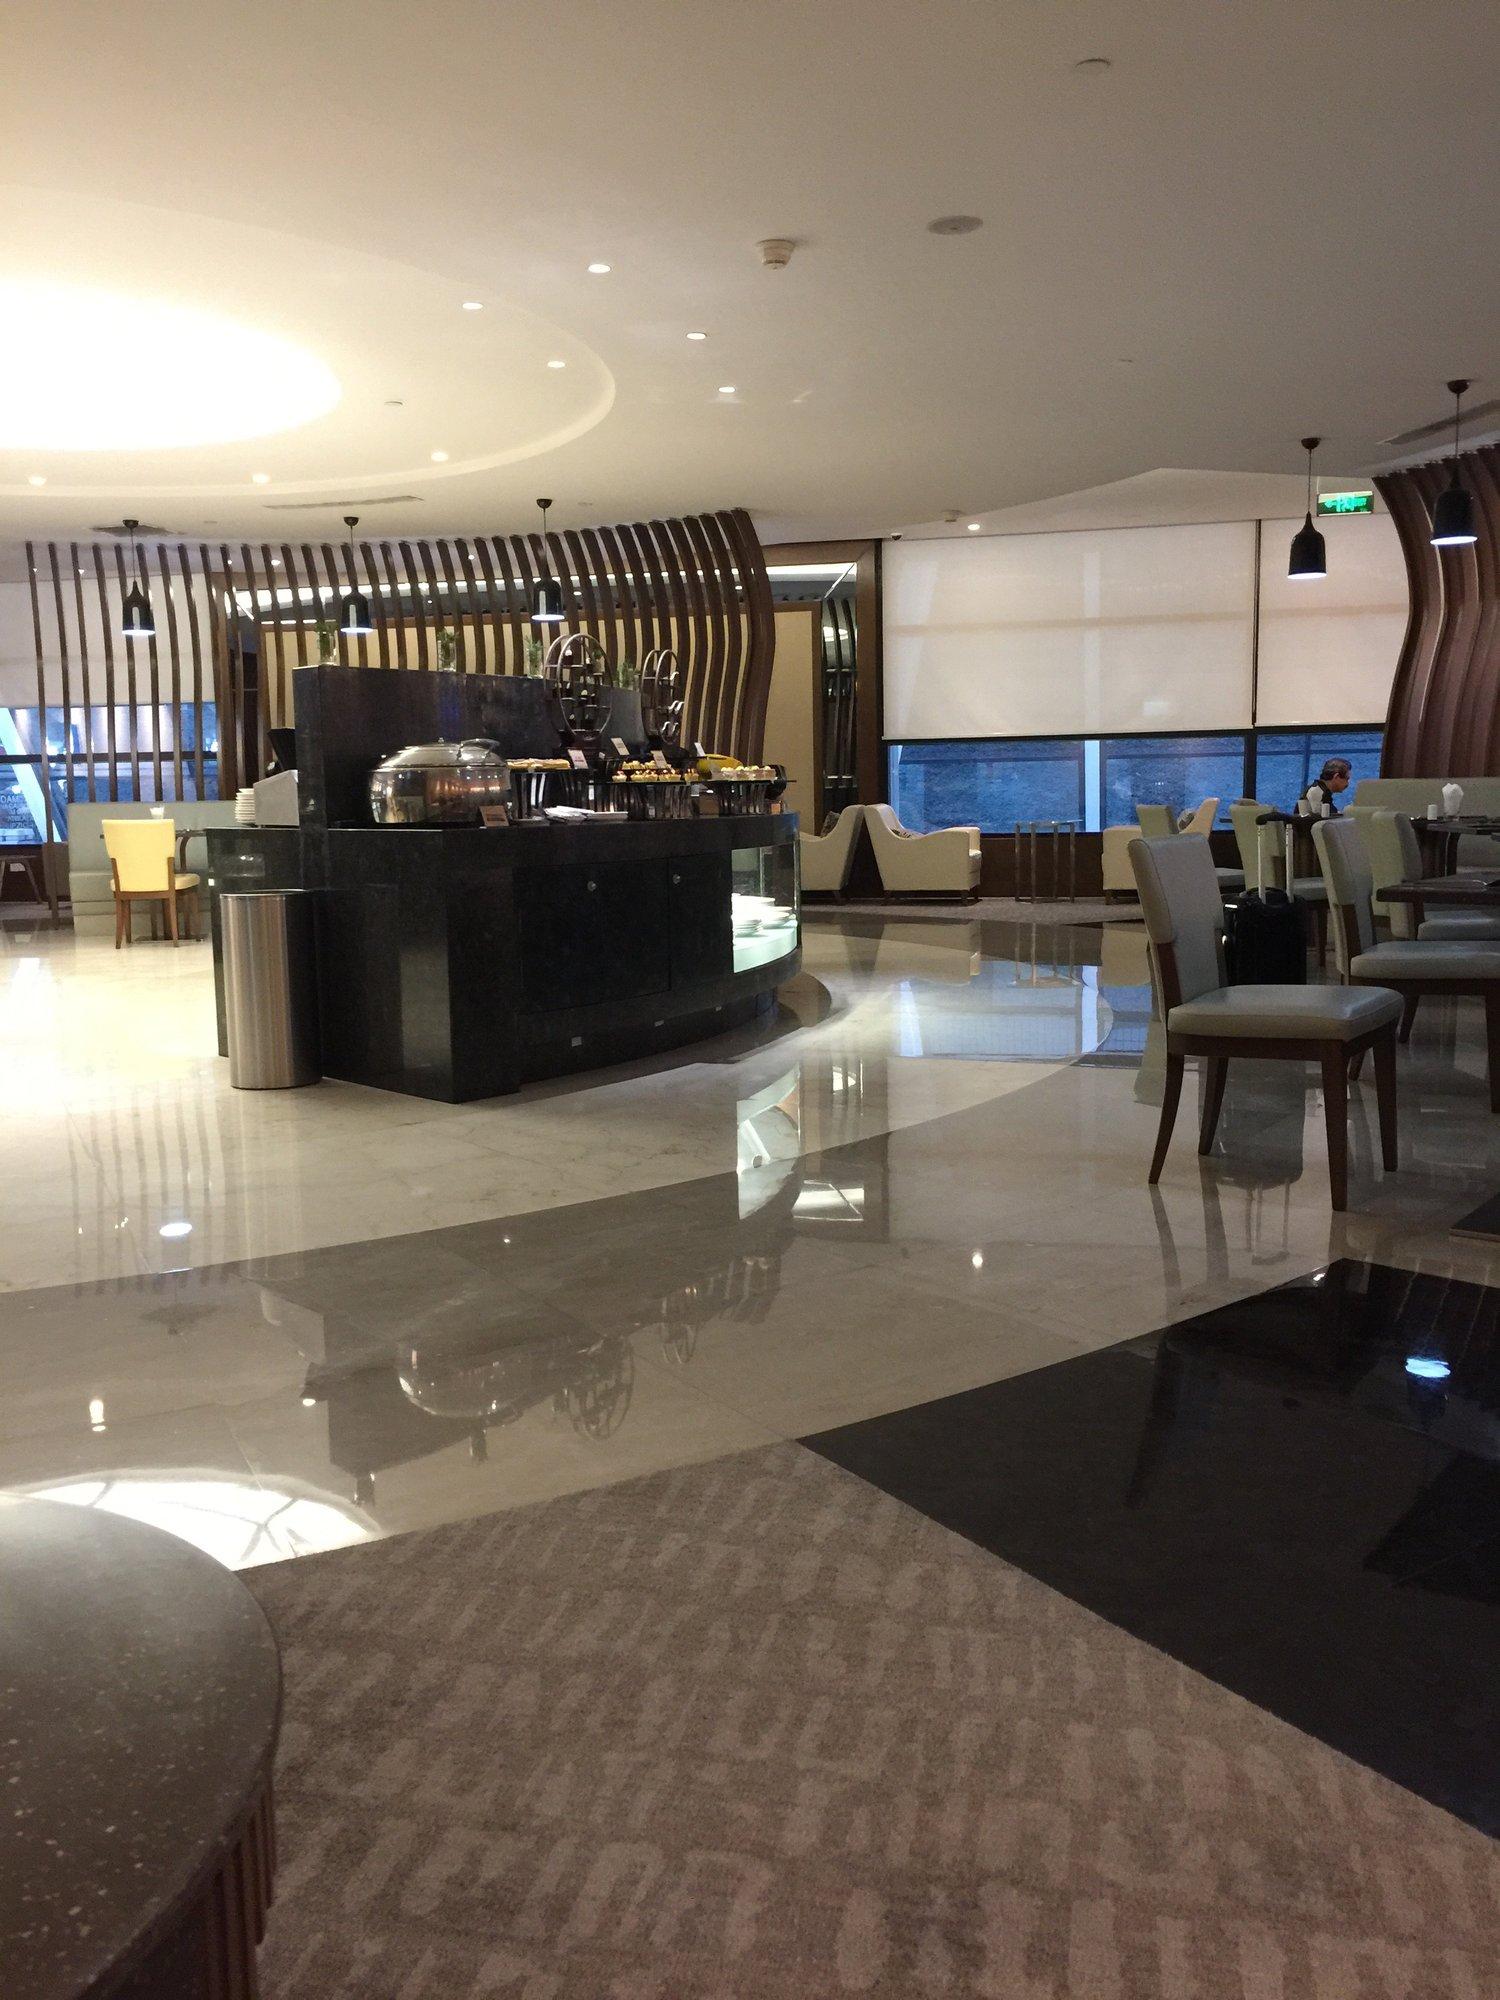 No. 71 Air China First Class Lounge image 4 of 10